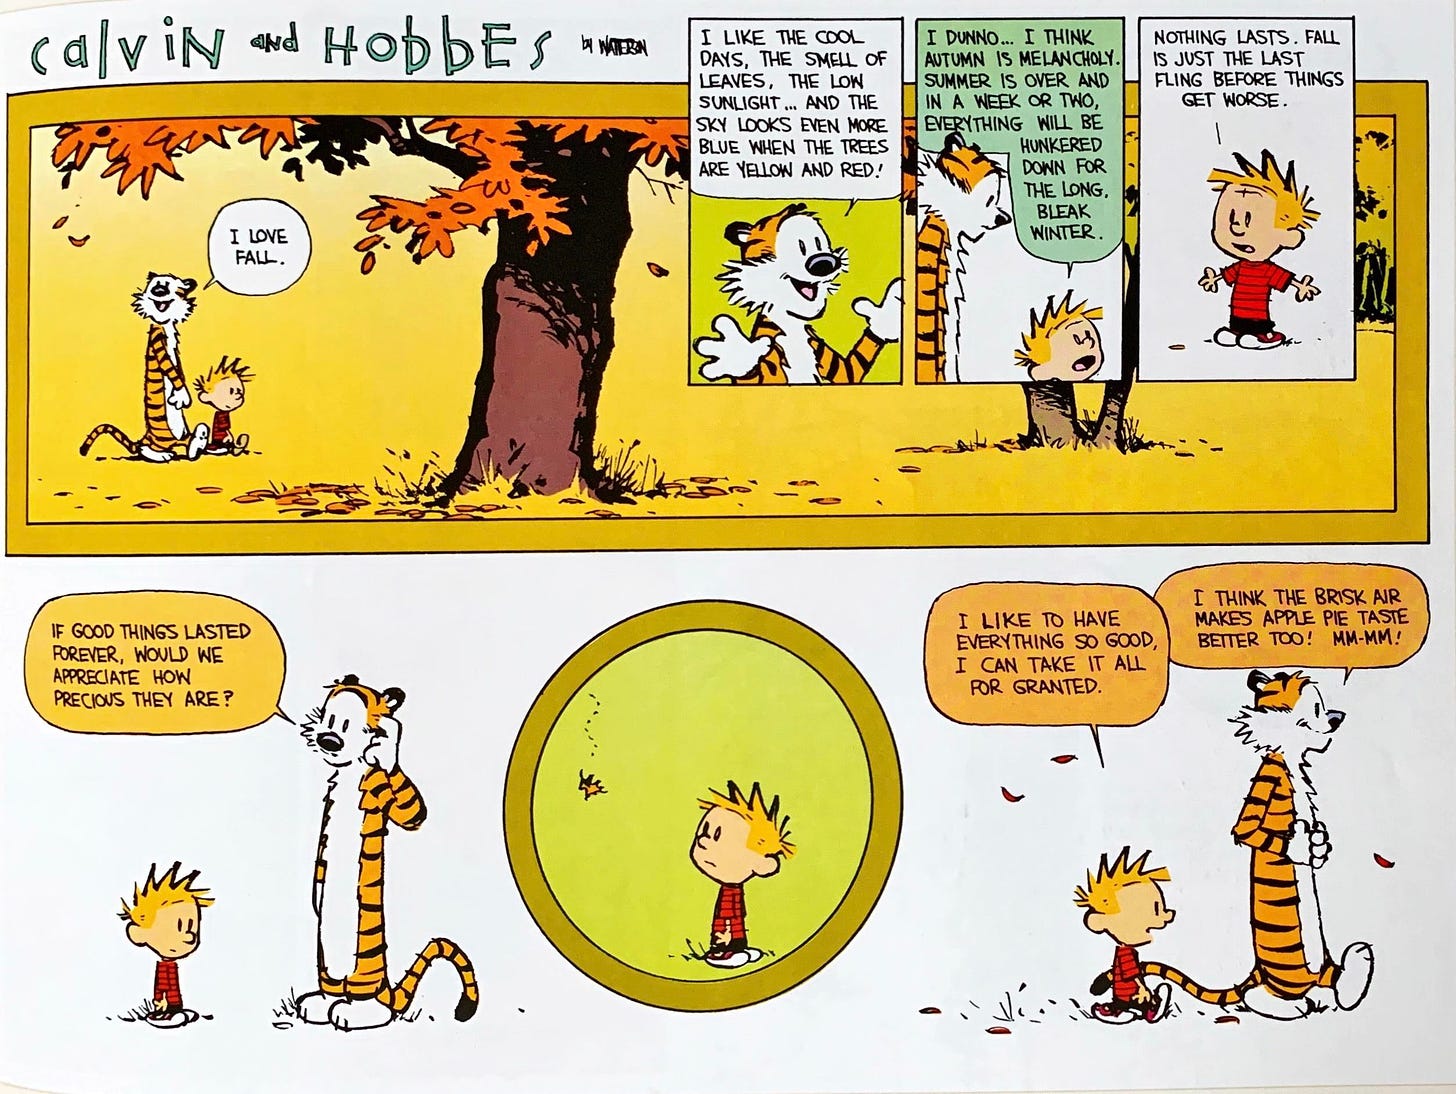 If good things lasted forever, would we appreciate how precious they are?”  : r/calvinandhobbes